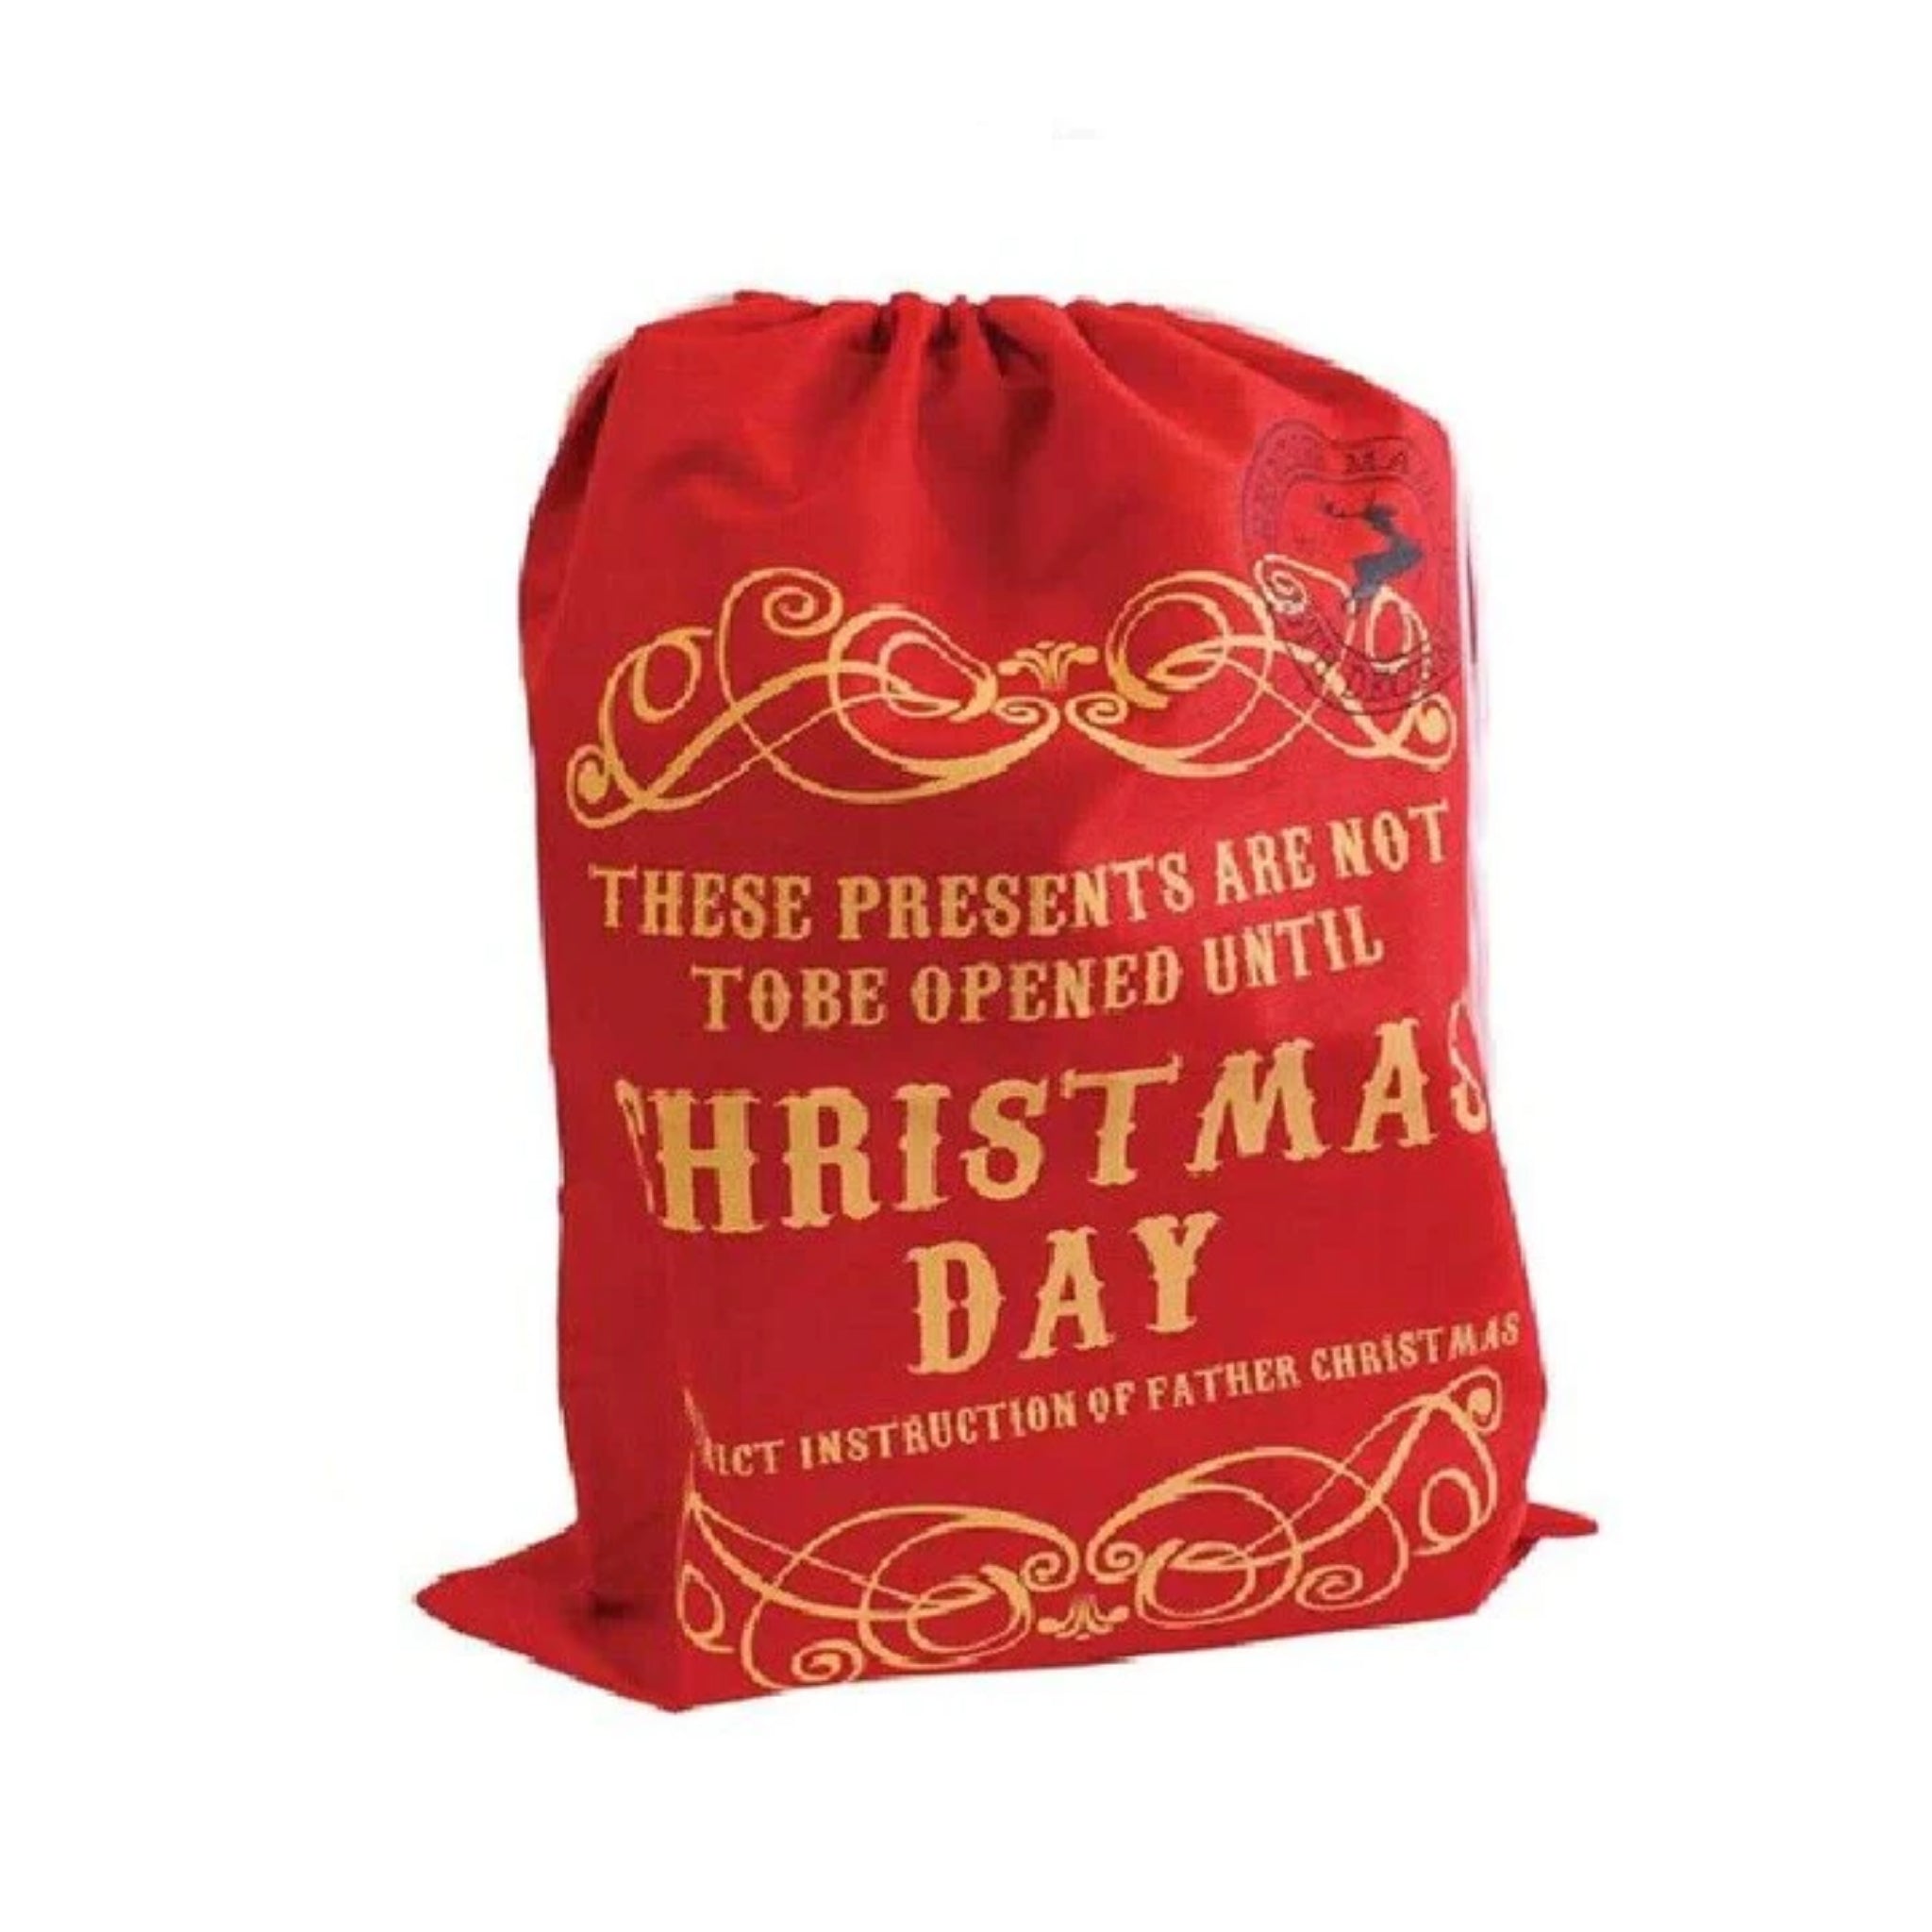 Beclen Harp Giant/Jumbo/Large Luxury Personalized Christmas/Xmas Santa/Bike/Red Father/Rudolph/Reversable Sequin/Tartan/Khaki Bags/Sacks/Stocking For Gifts/Presents-Perfect Sack For Gift Presentation